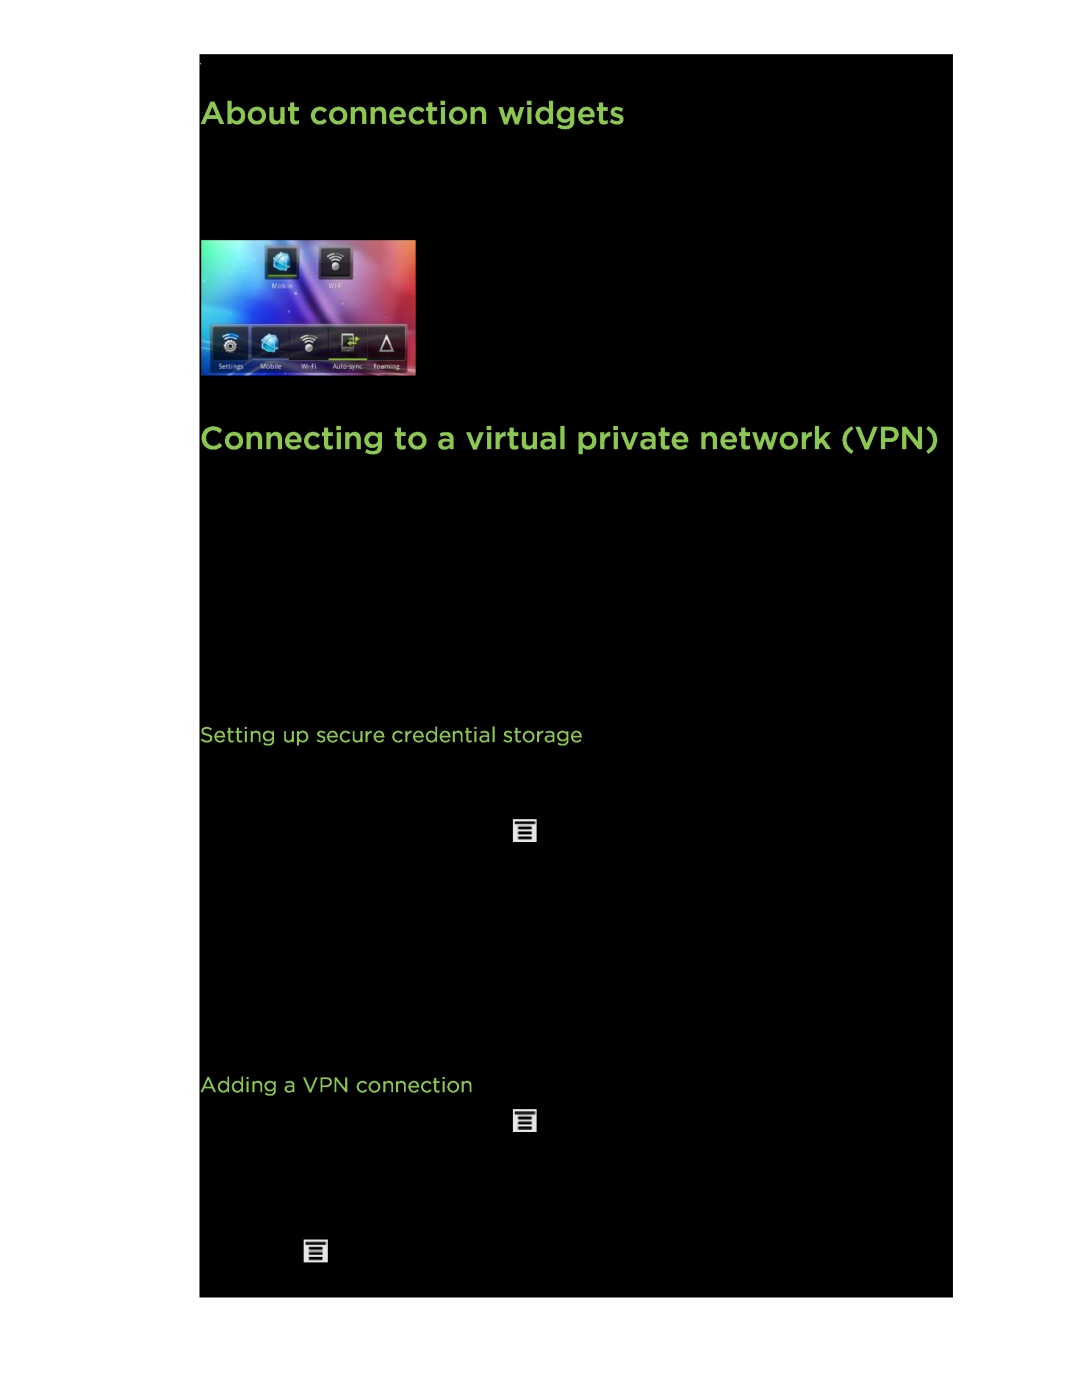 HTC HTCFlyerP512 manual About connection widgets, Connecting to a virtual private network VPN, Adding a VPN connection 